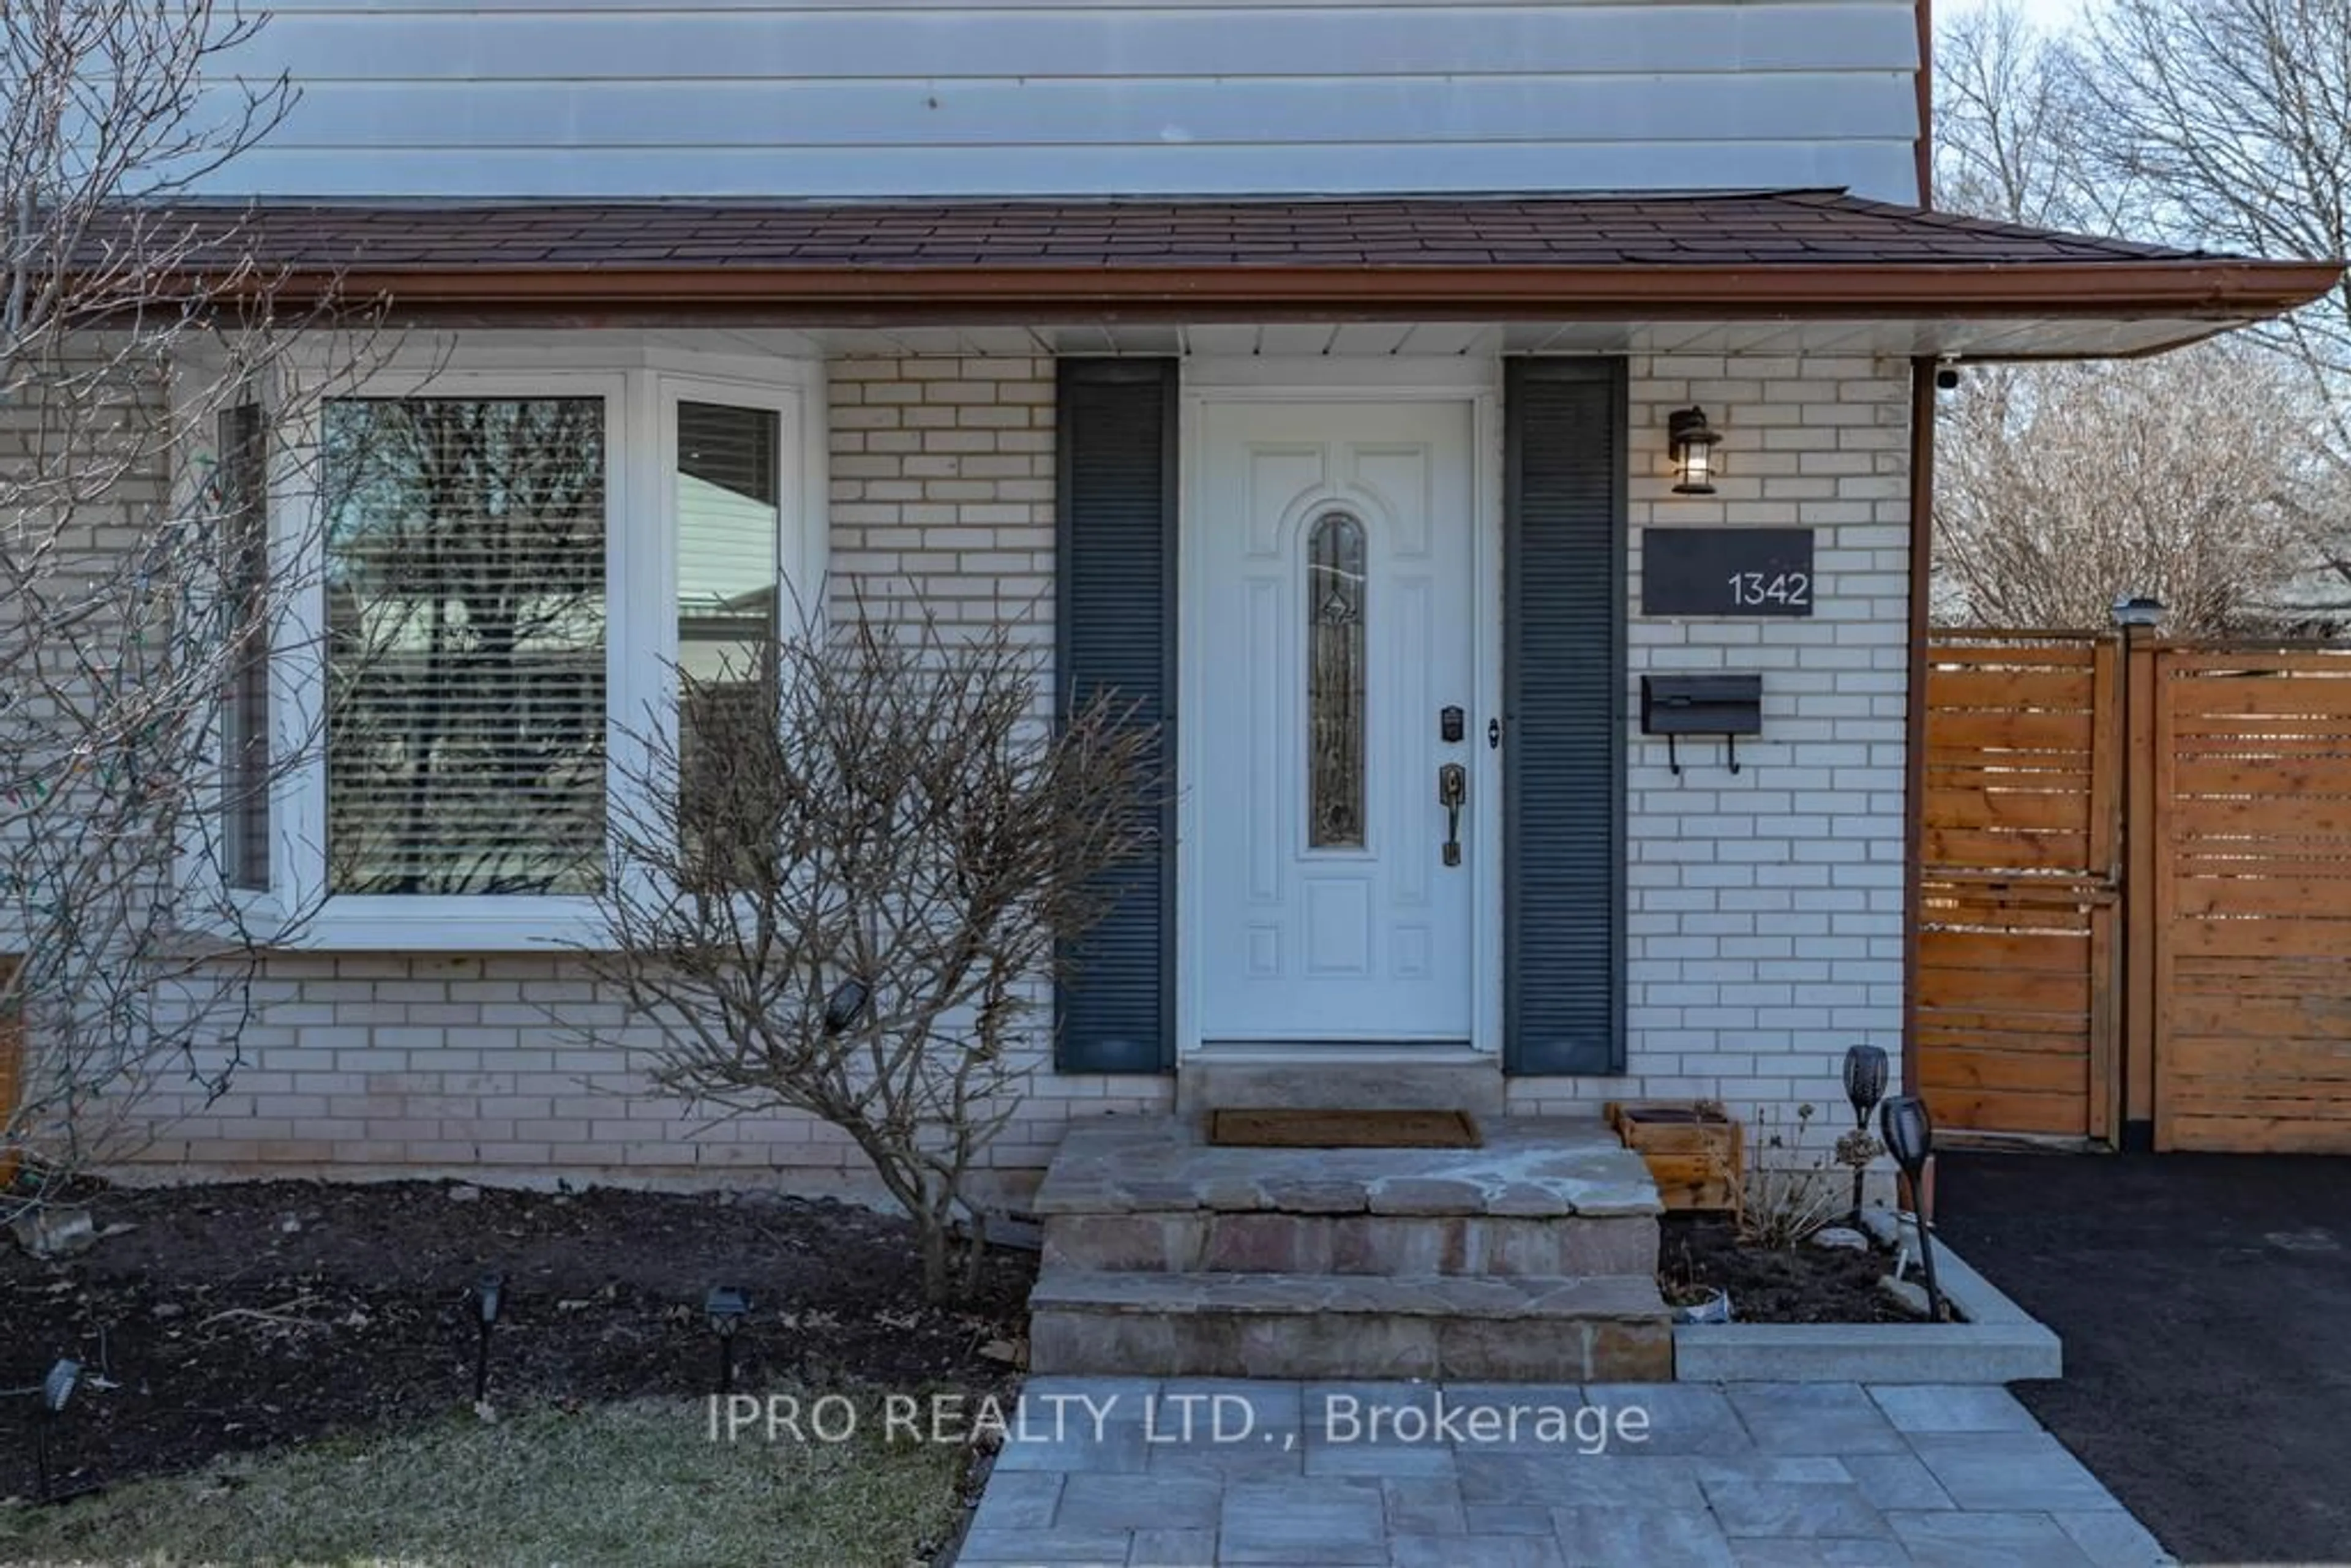 Home with brick exterior material for 1342 Roylen Rd, Oakville Ontario L6H 1V4